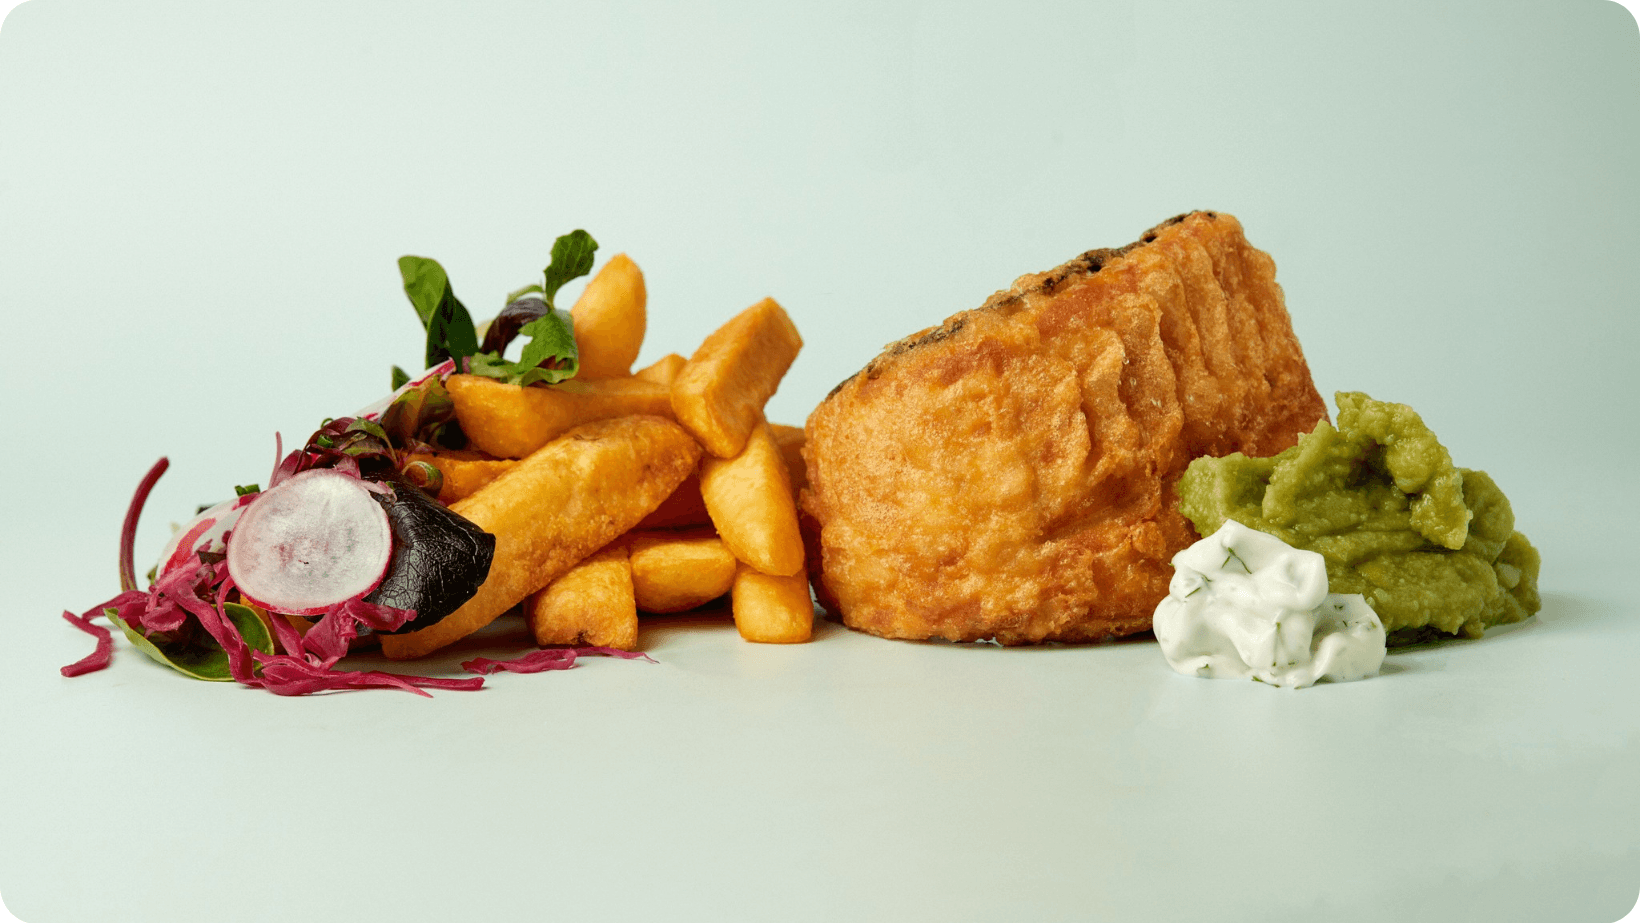 Vegan fish and chips from No Catch Co. in Brighton, England.